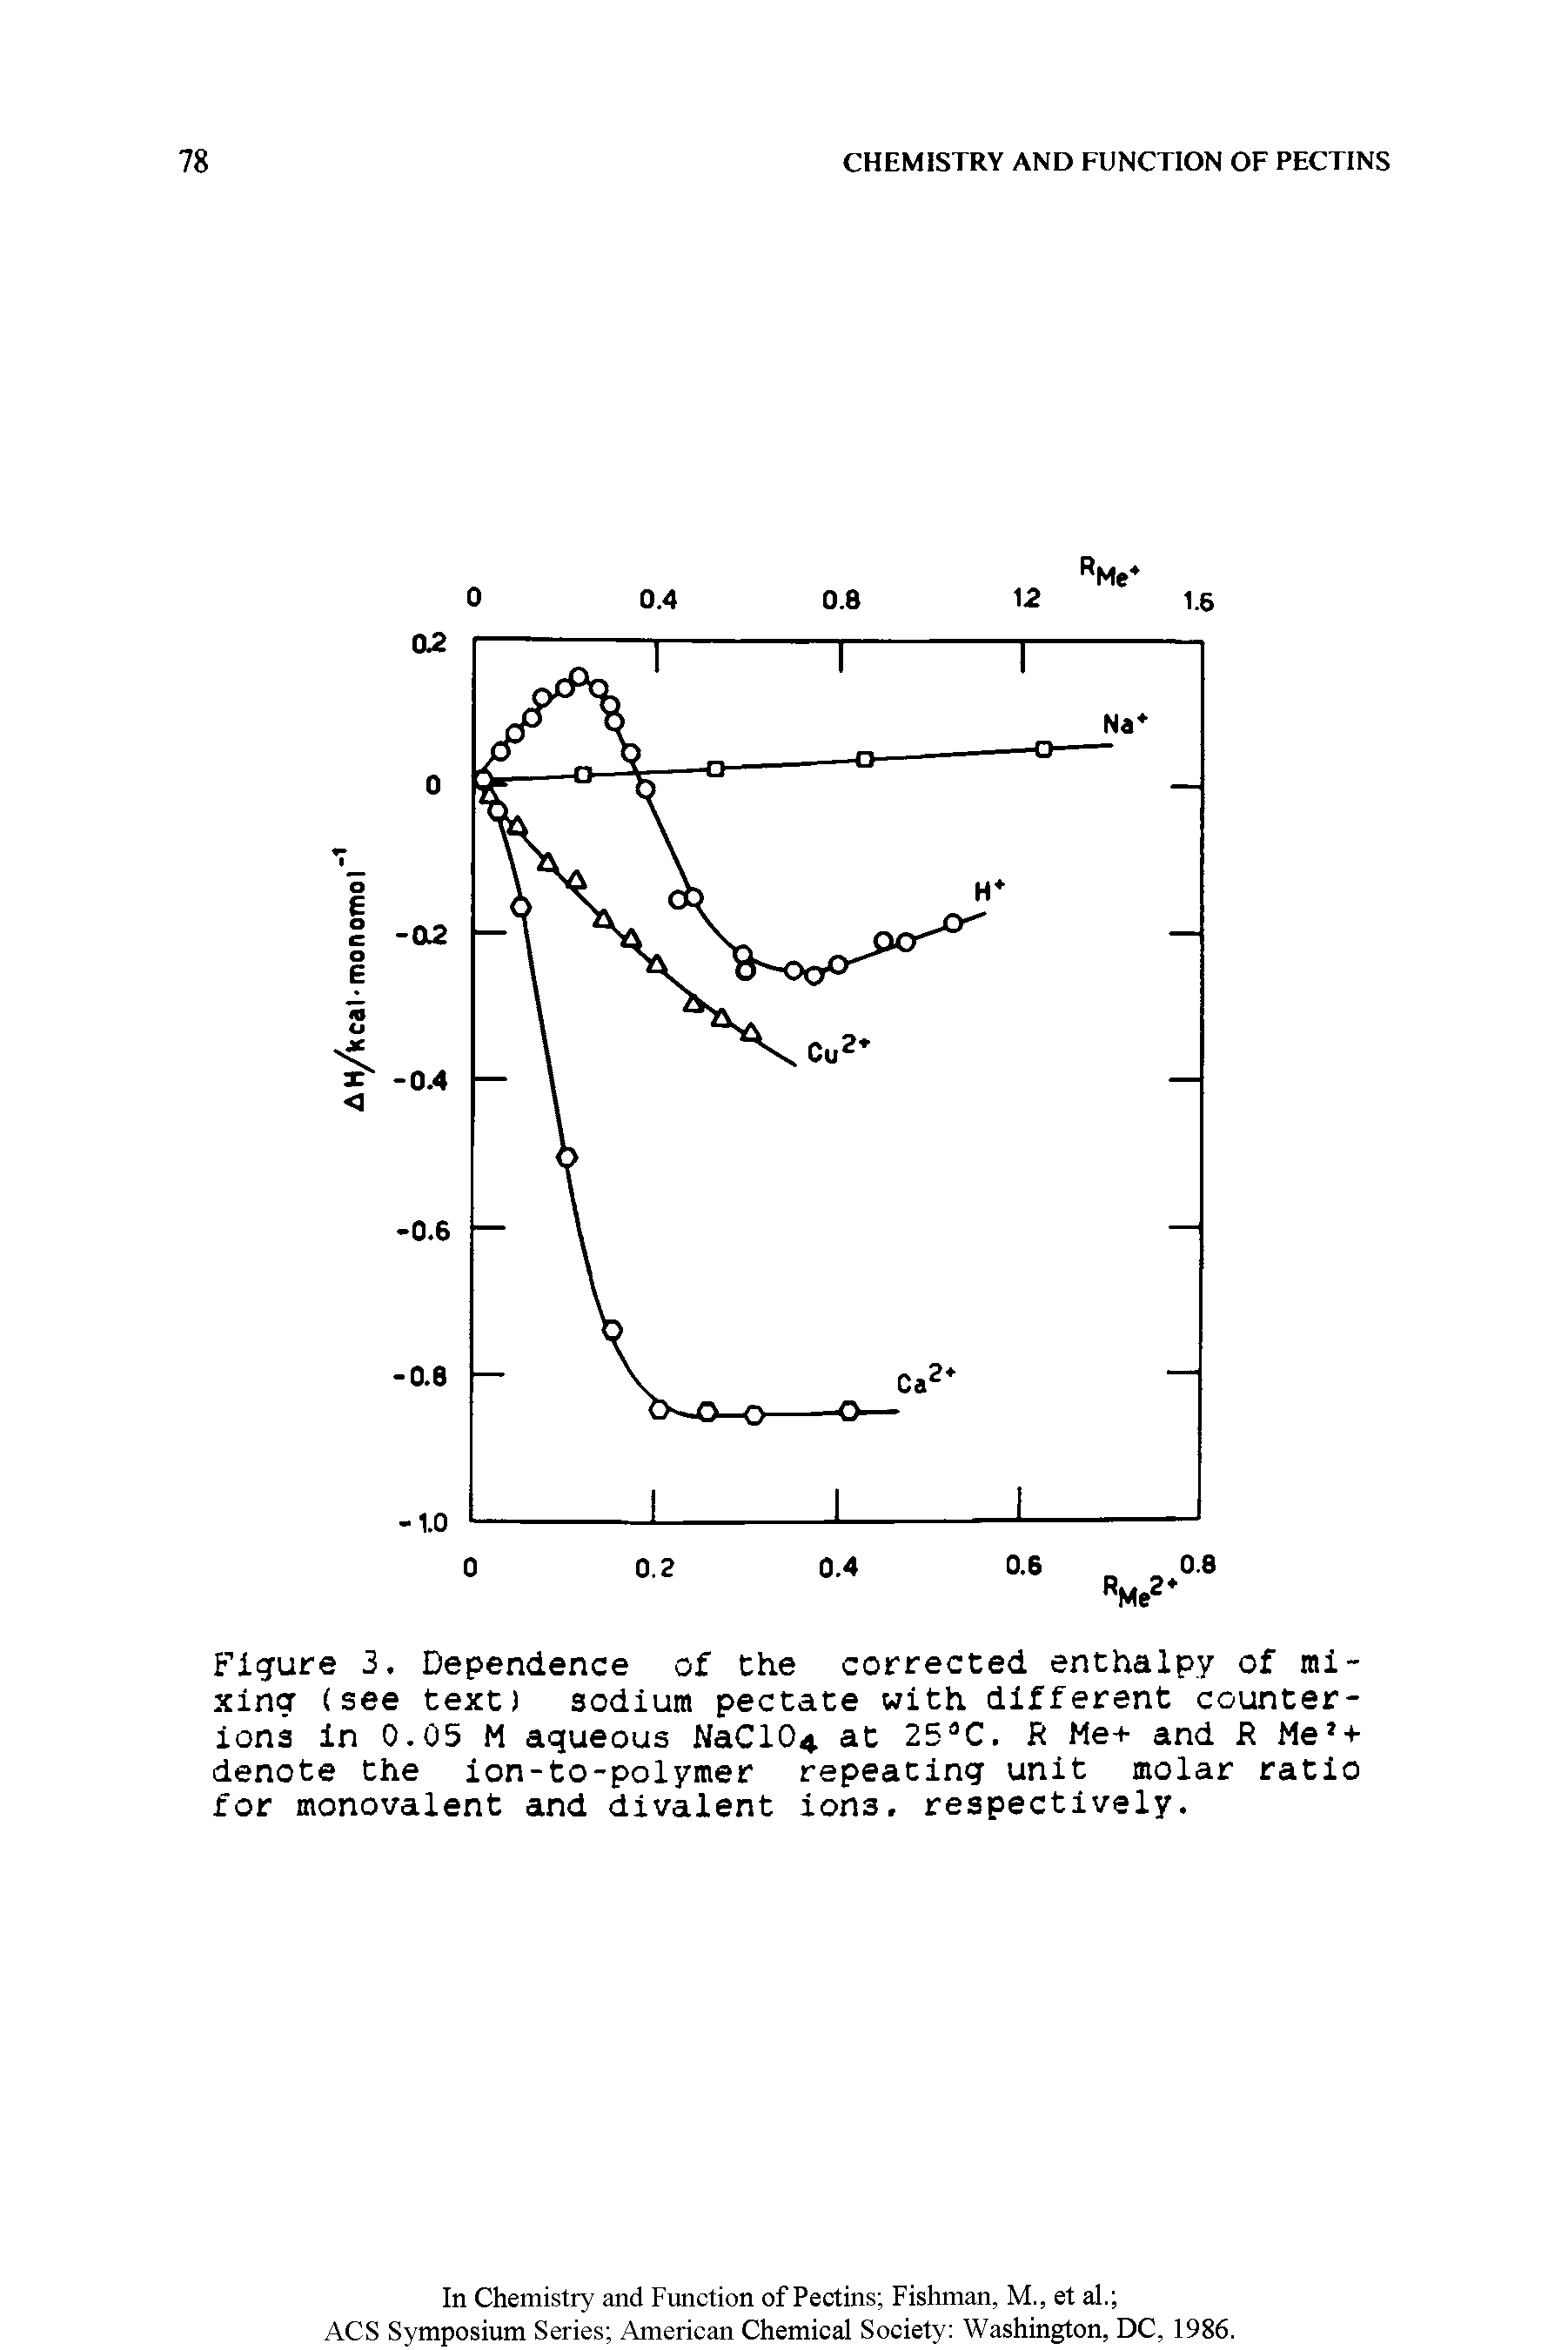 Figure 3. Dependence of Che corrected enthalpy of mixing (see text) sodium pectate with different counterions in 0.05 M aqueous NaC104 at 25 C. R Me+ and R Me + denote Che ion-to-polymer repeating unit molar ratio for monovalent and divalent ions, respectively.